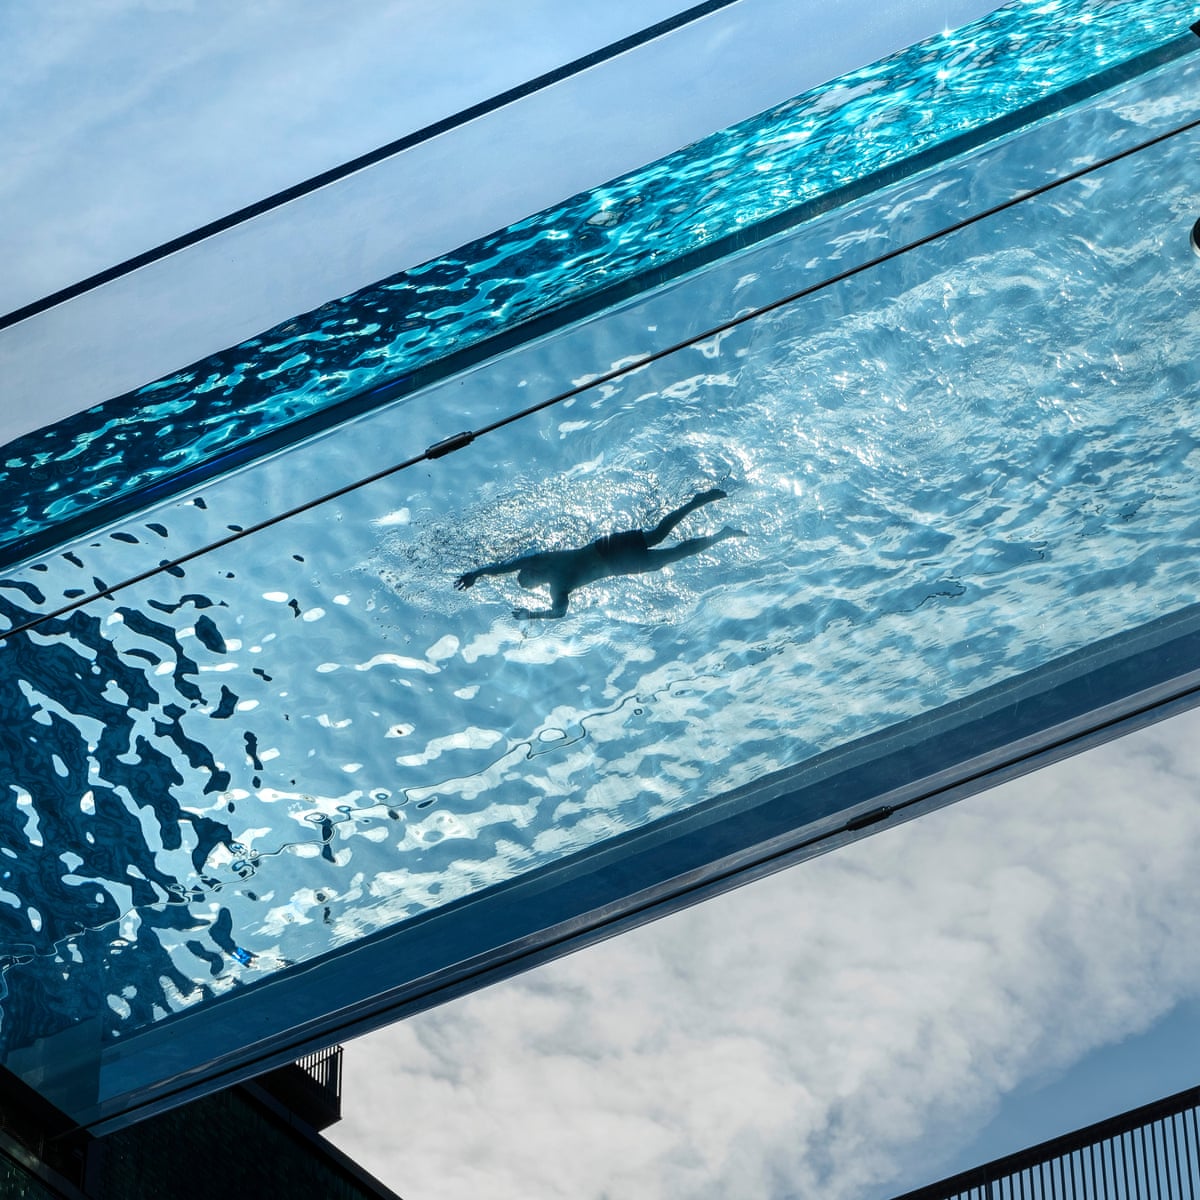 London 'Sky Pool' Among Wave Of Ever More Implausible Designs | Swimming |  The Guardian